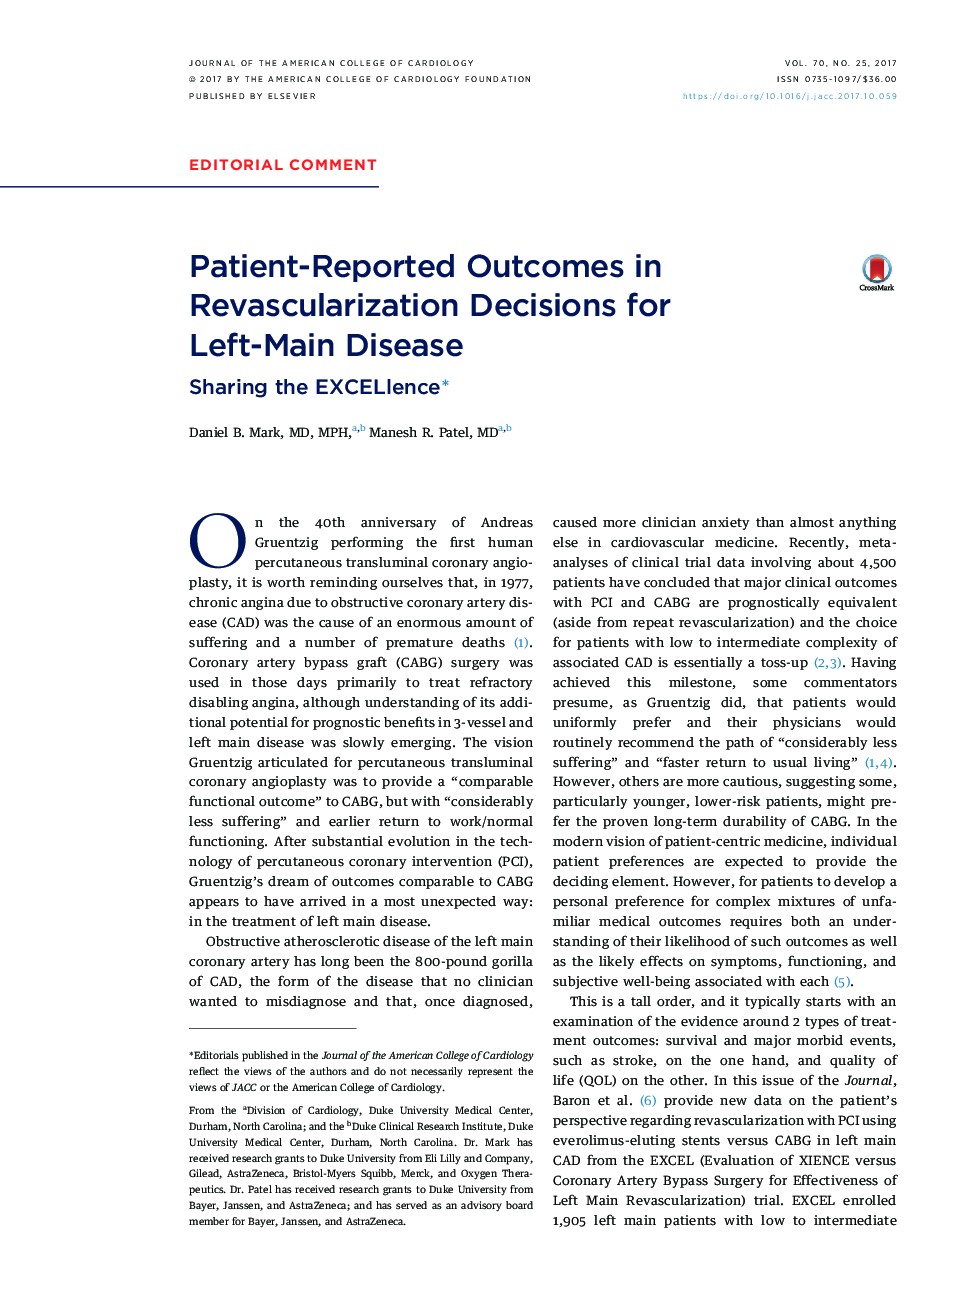 Patient-Reported Outcomes in Revascularization Decisions for Left-MainÂ Disease